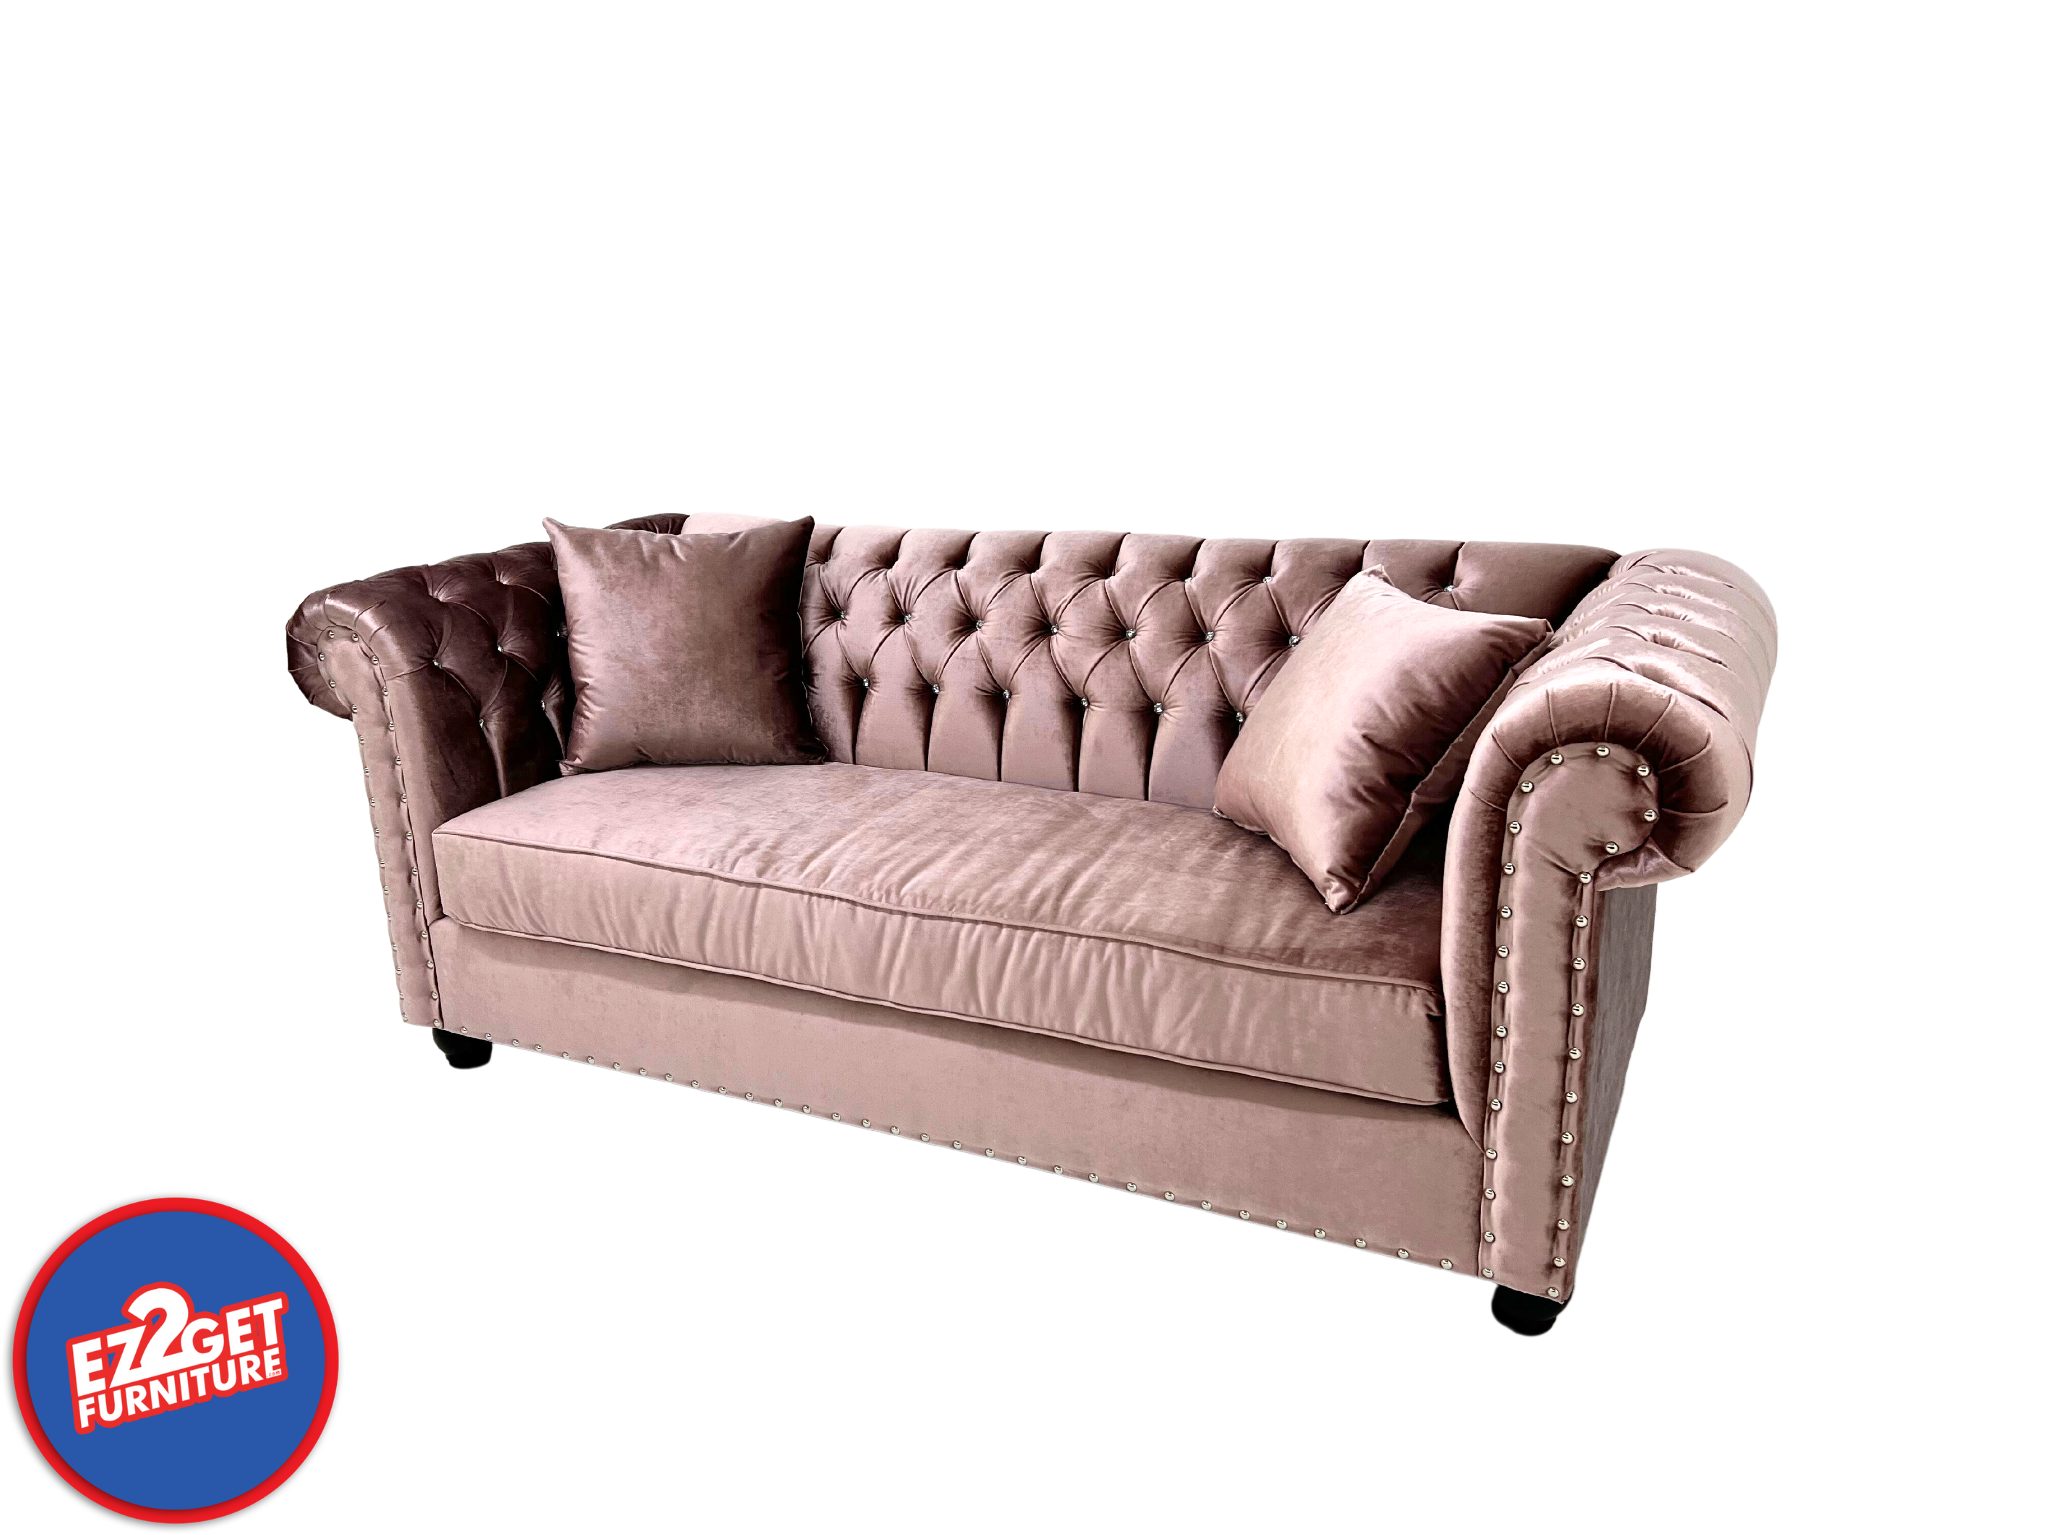 Tufted Pink Glam Sofa